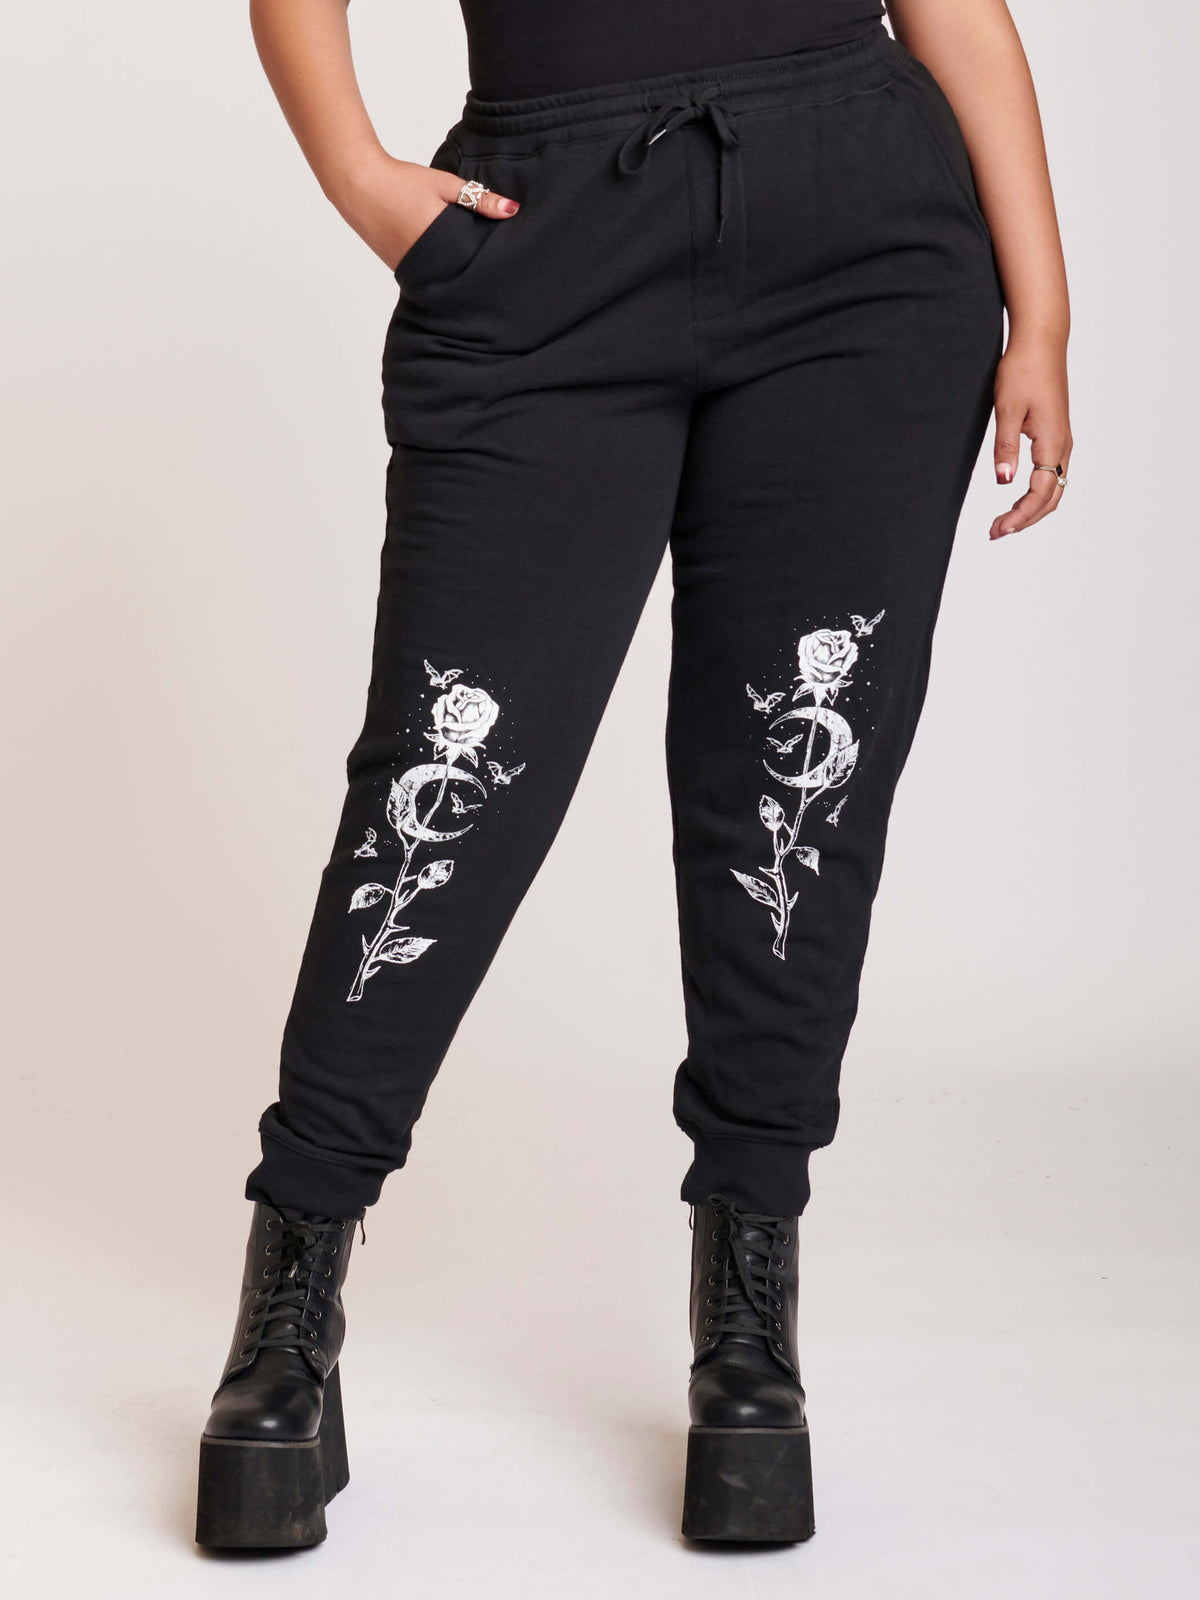 Black jogger with white rose and cresecent moon art at knees